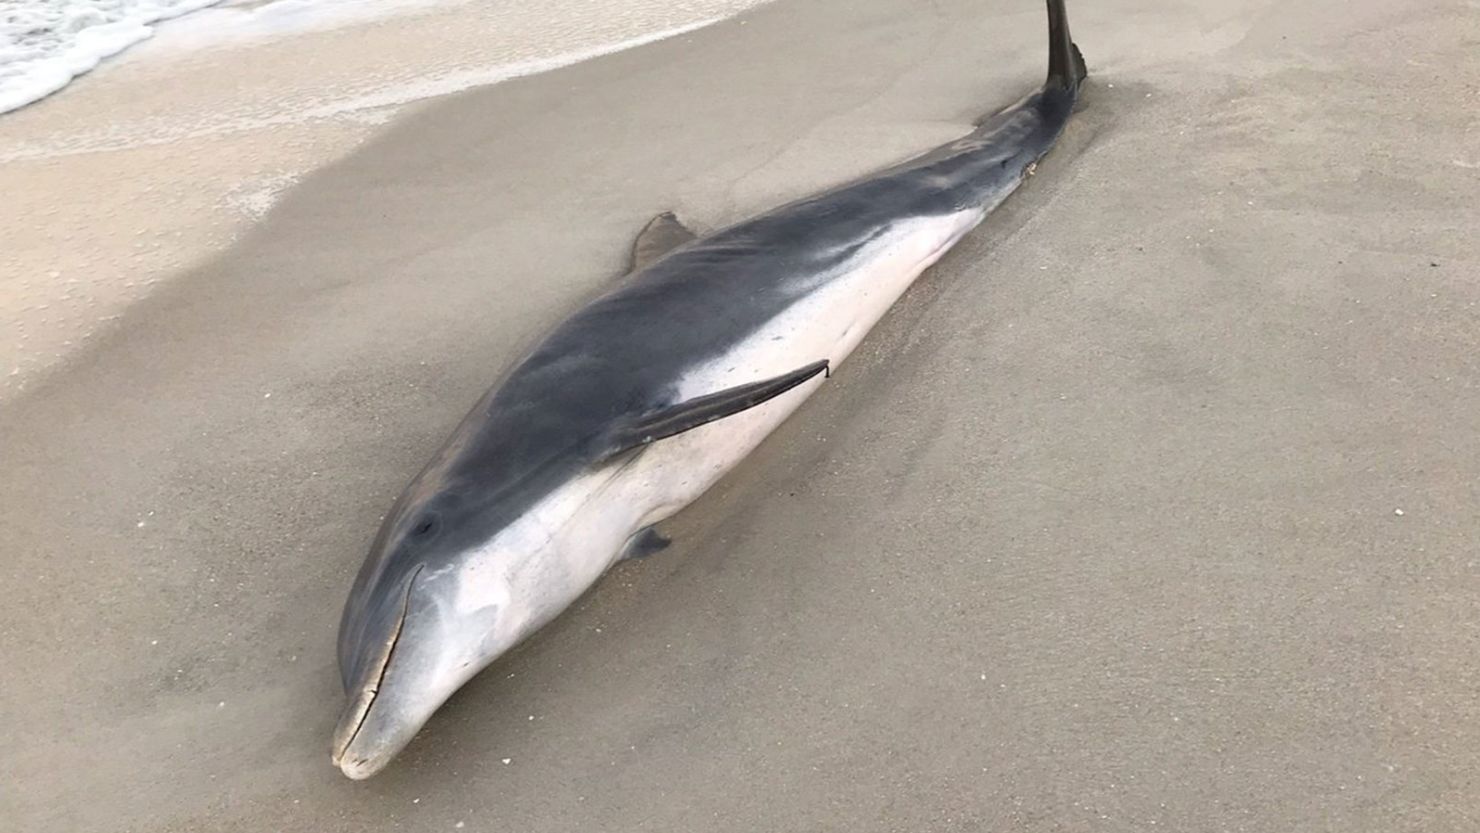 The National Oceanic and Atmospheric Administration (NOAA) is asking for the public's help in finding the people or person responsible for the recent cruel deaths of two dolphins found off the Florida coast.